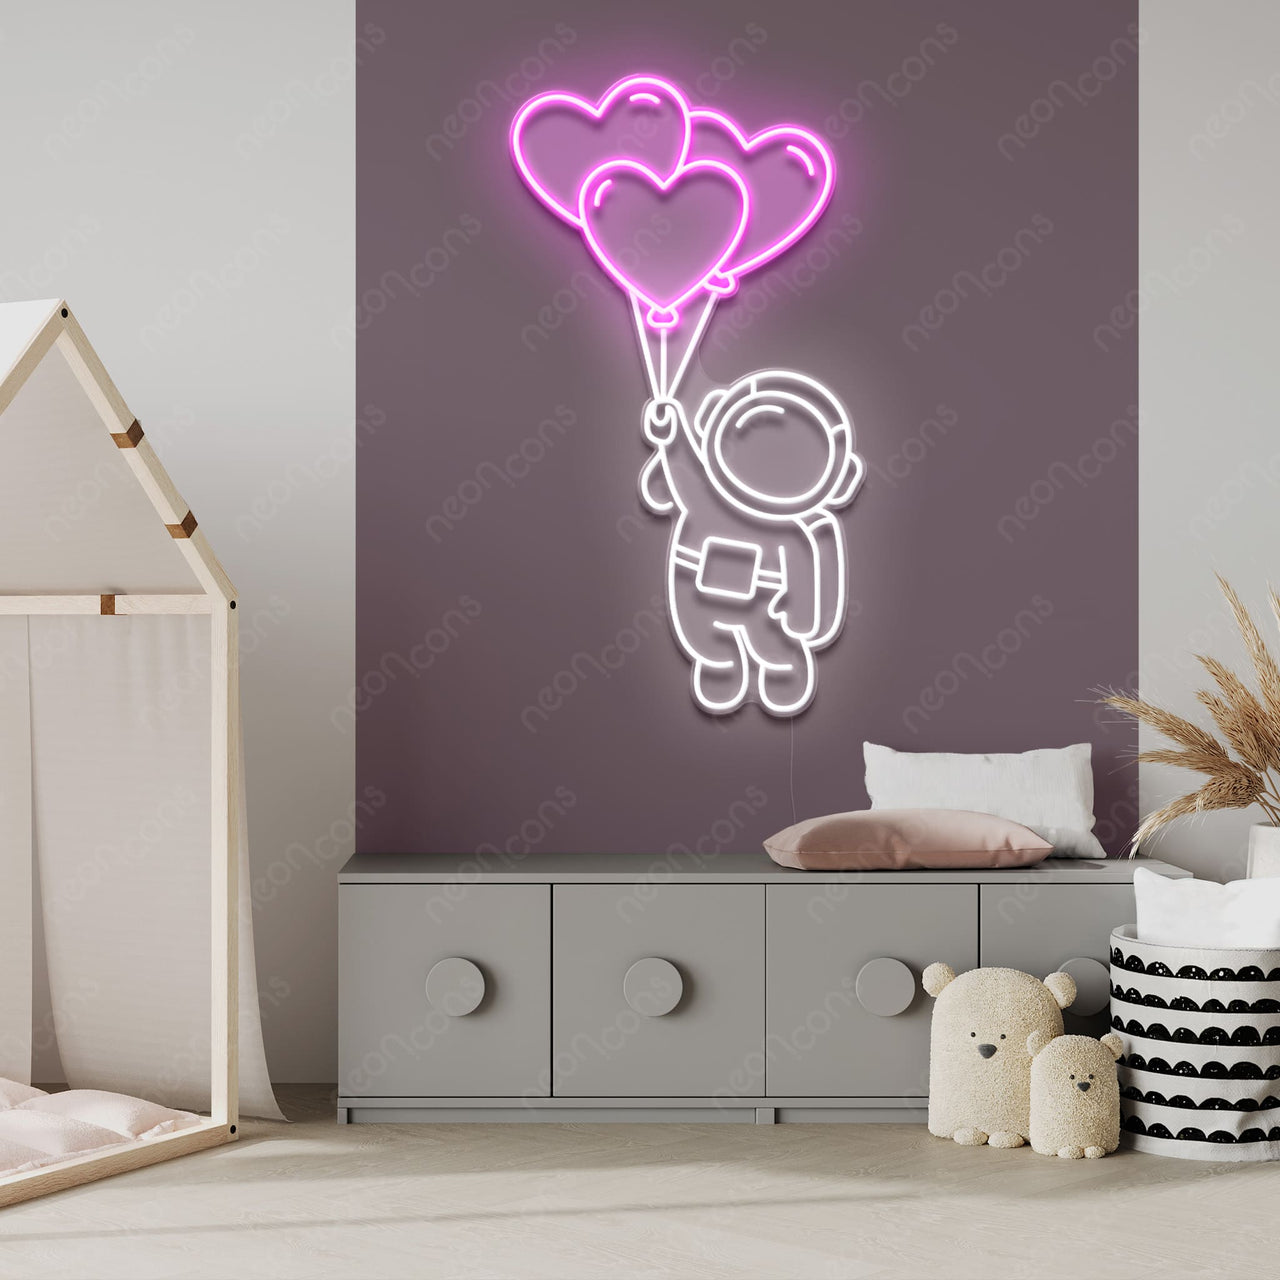 "Cloud Nine" LED Neon Sign by Neon Icons